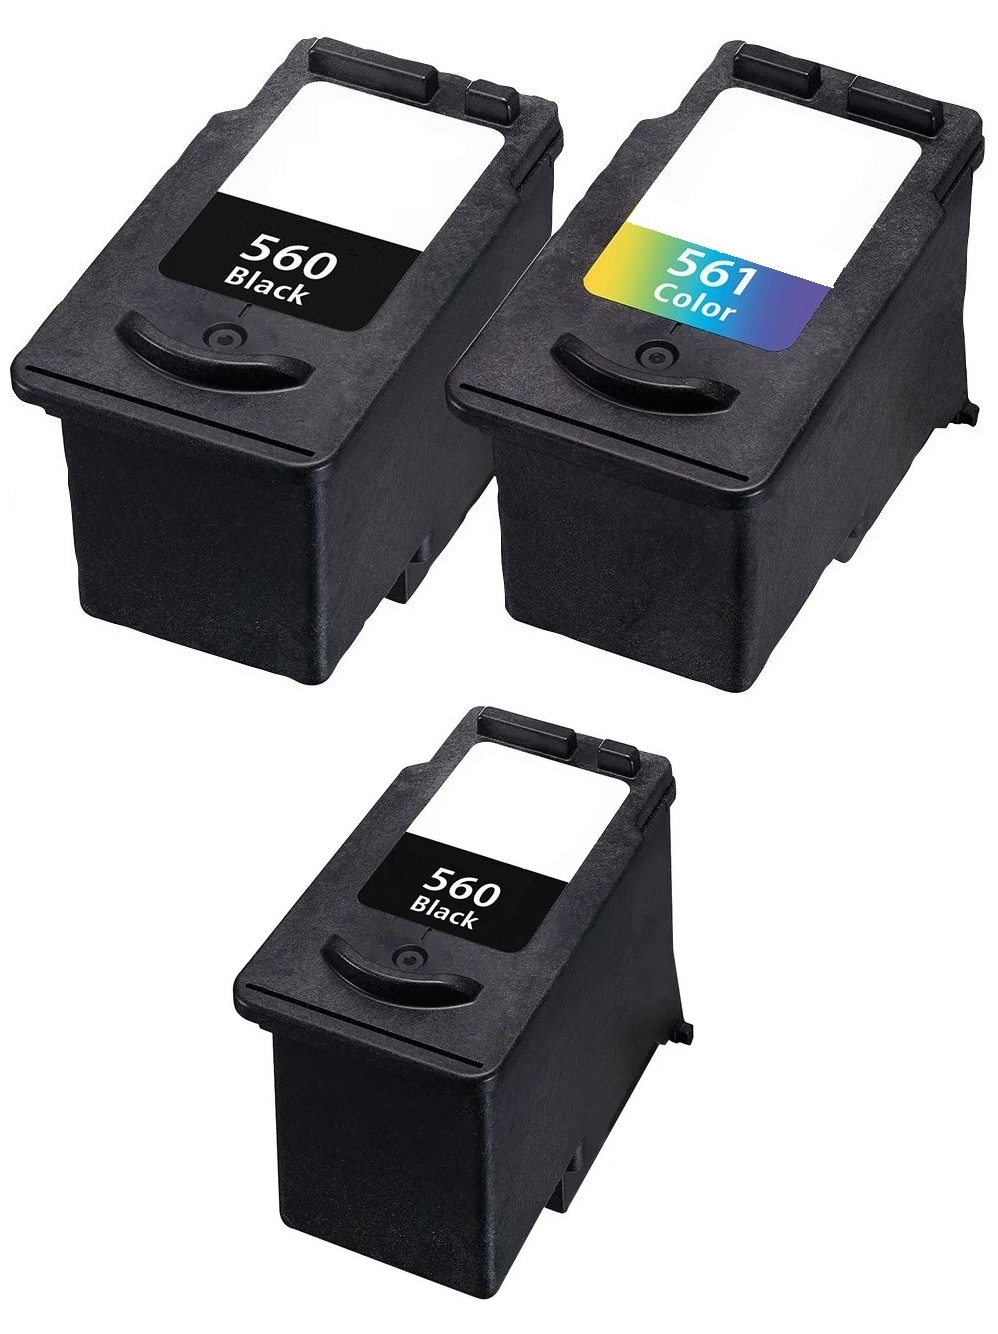 Canon PG-560 and CL-561 Black and Colour High Cap. Remanufactured Ink Cartridges & EXTRA BLACK